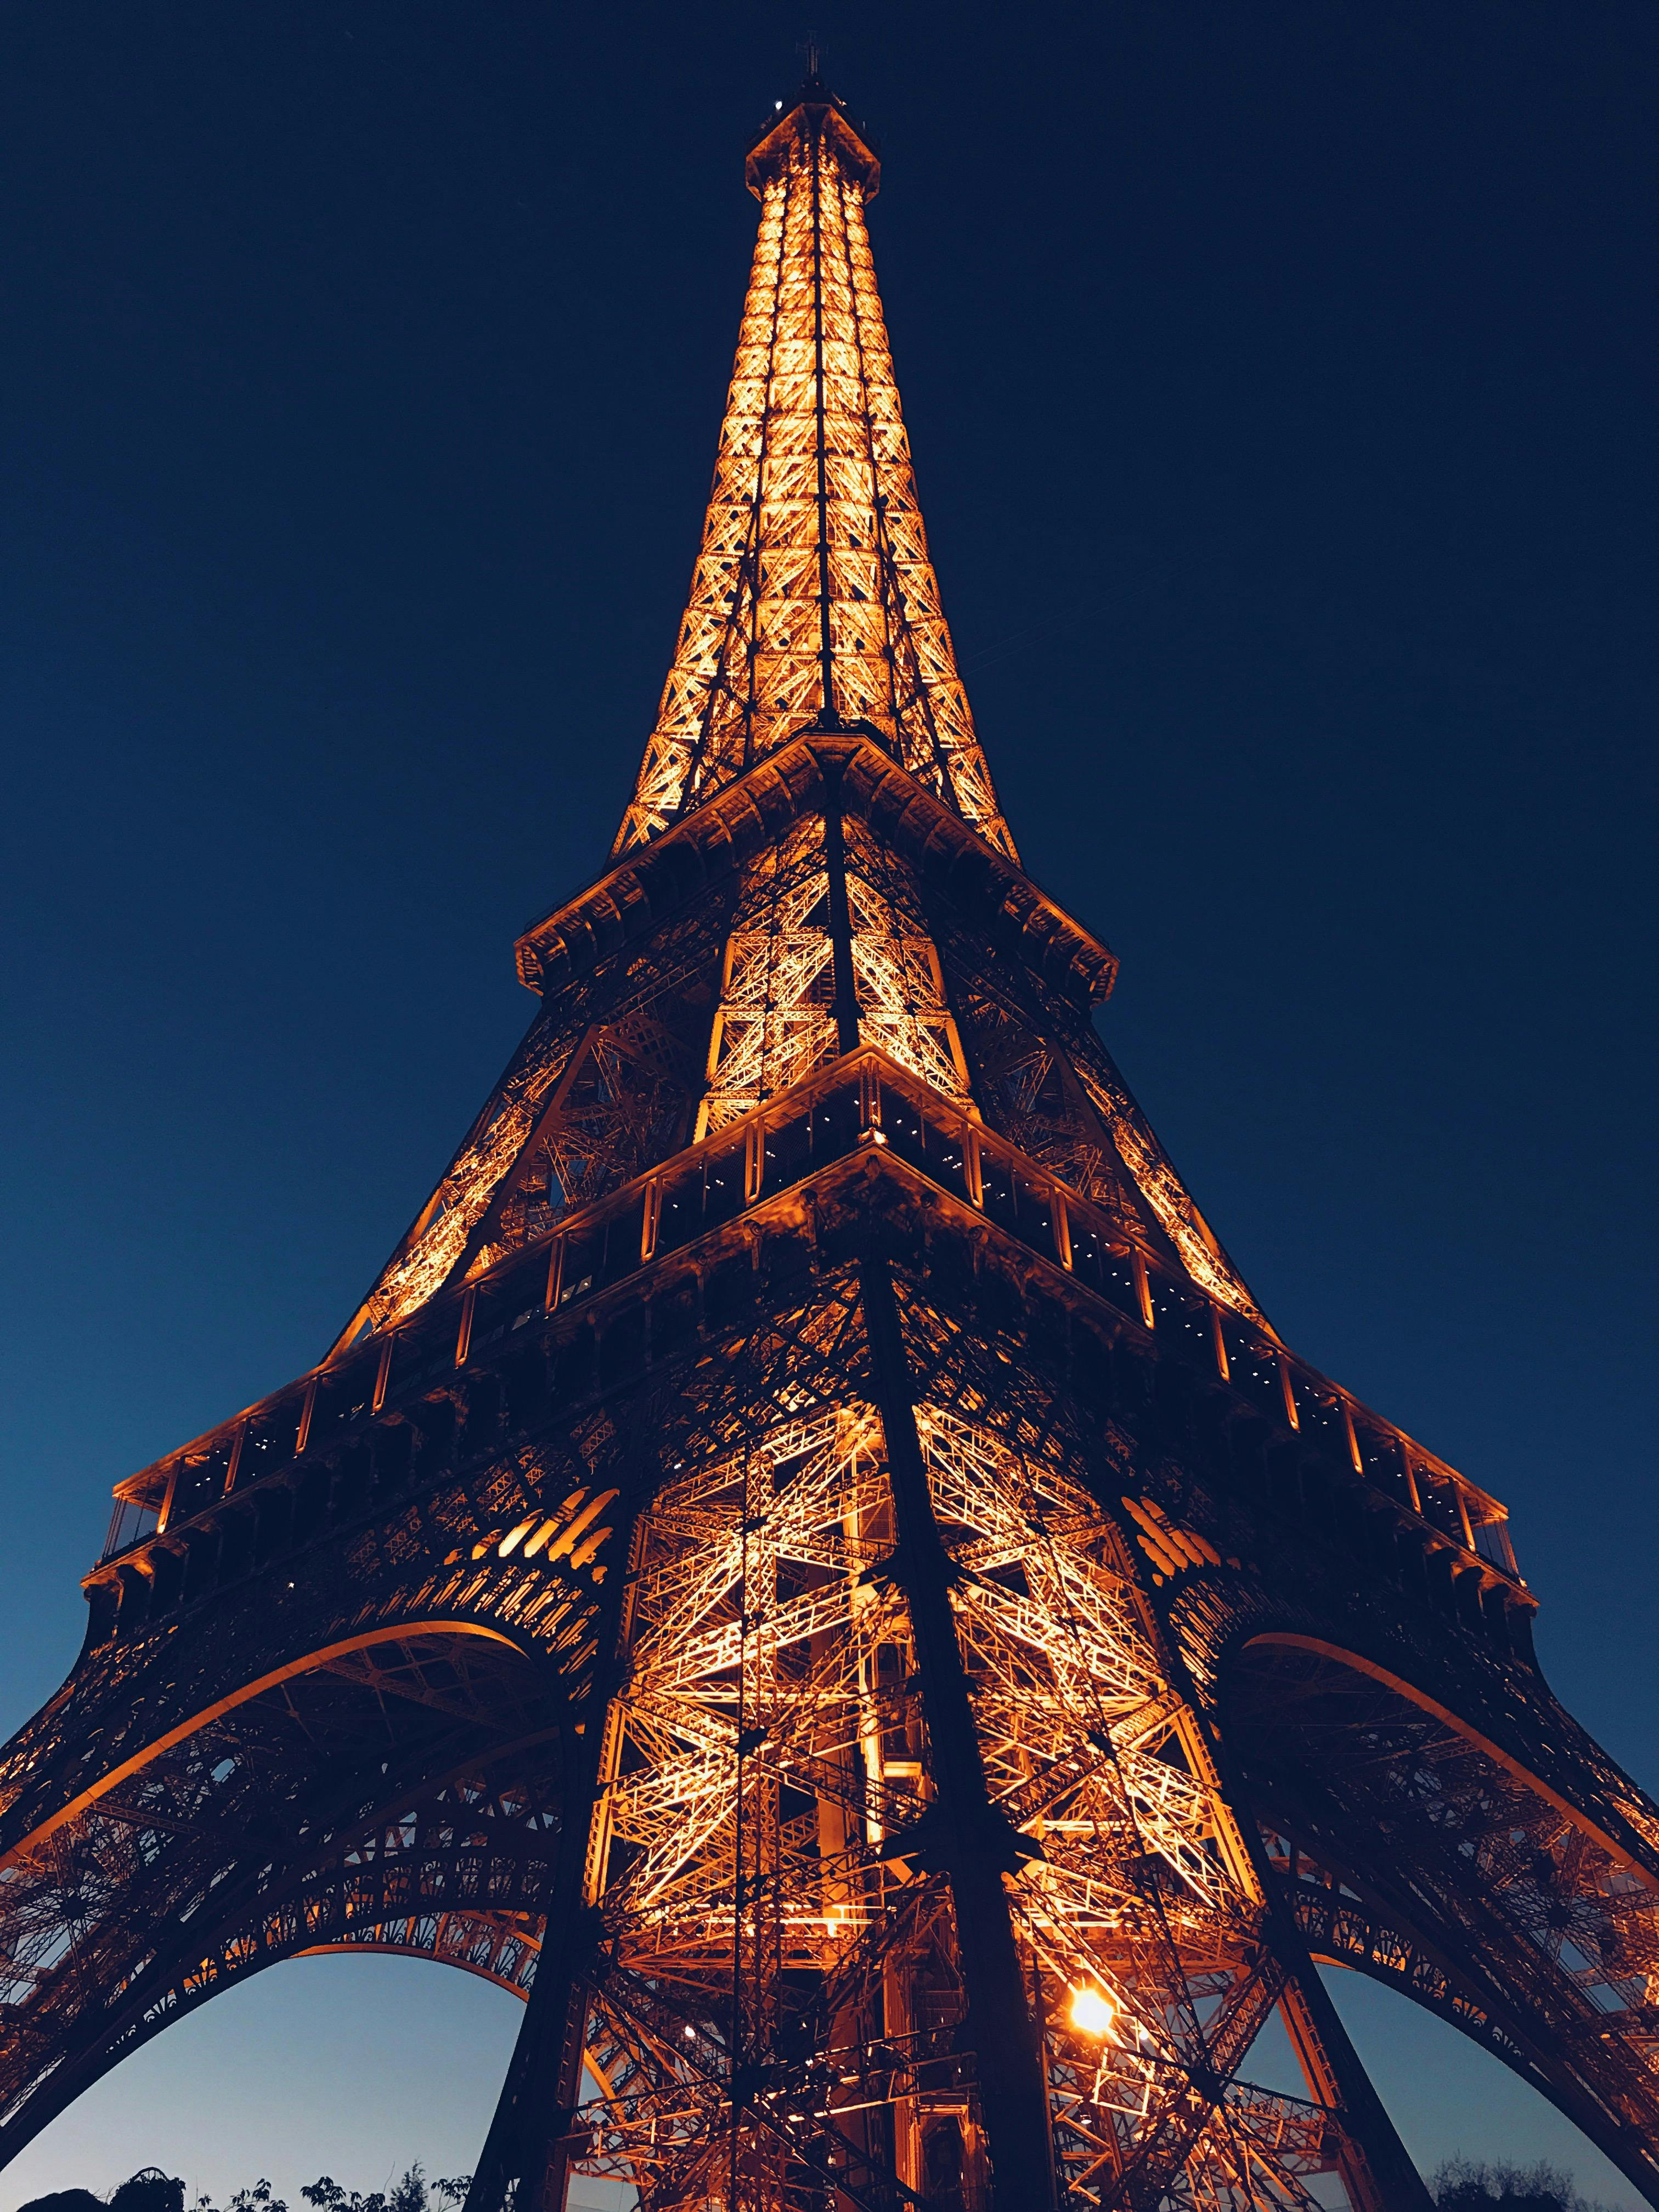 6000 Free Paris Pictures  Images in HD  Pixabay